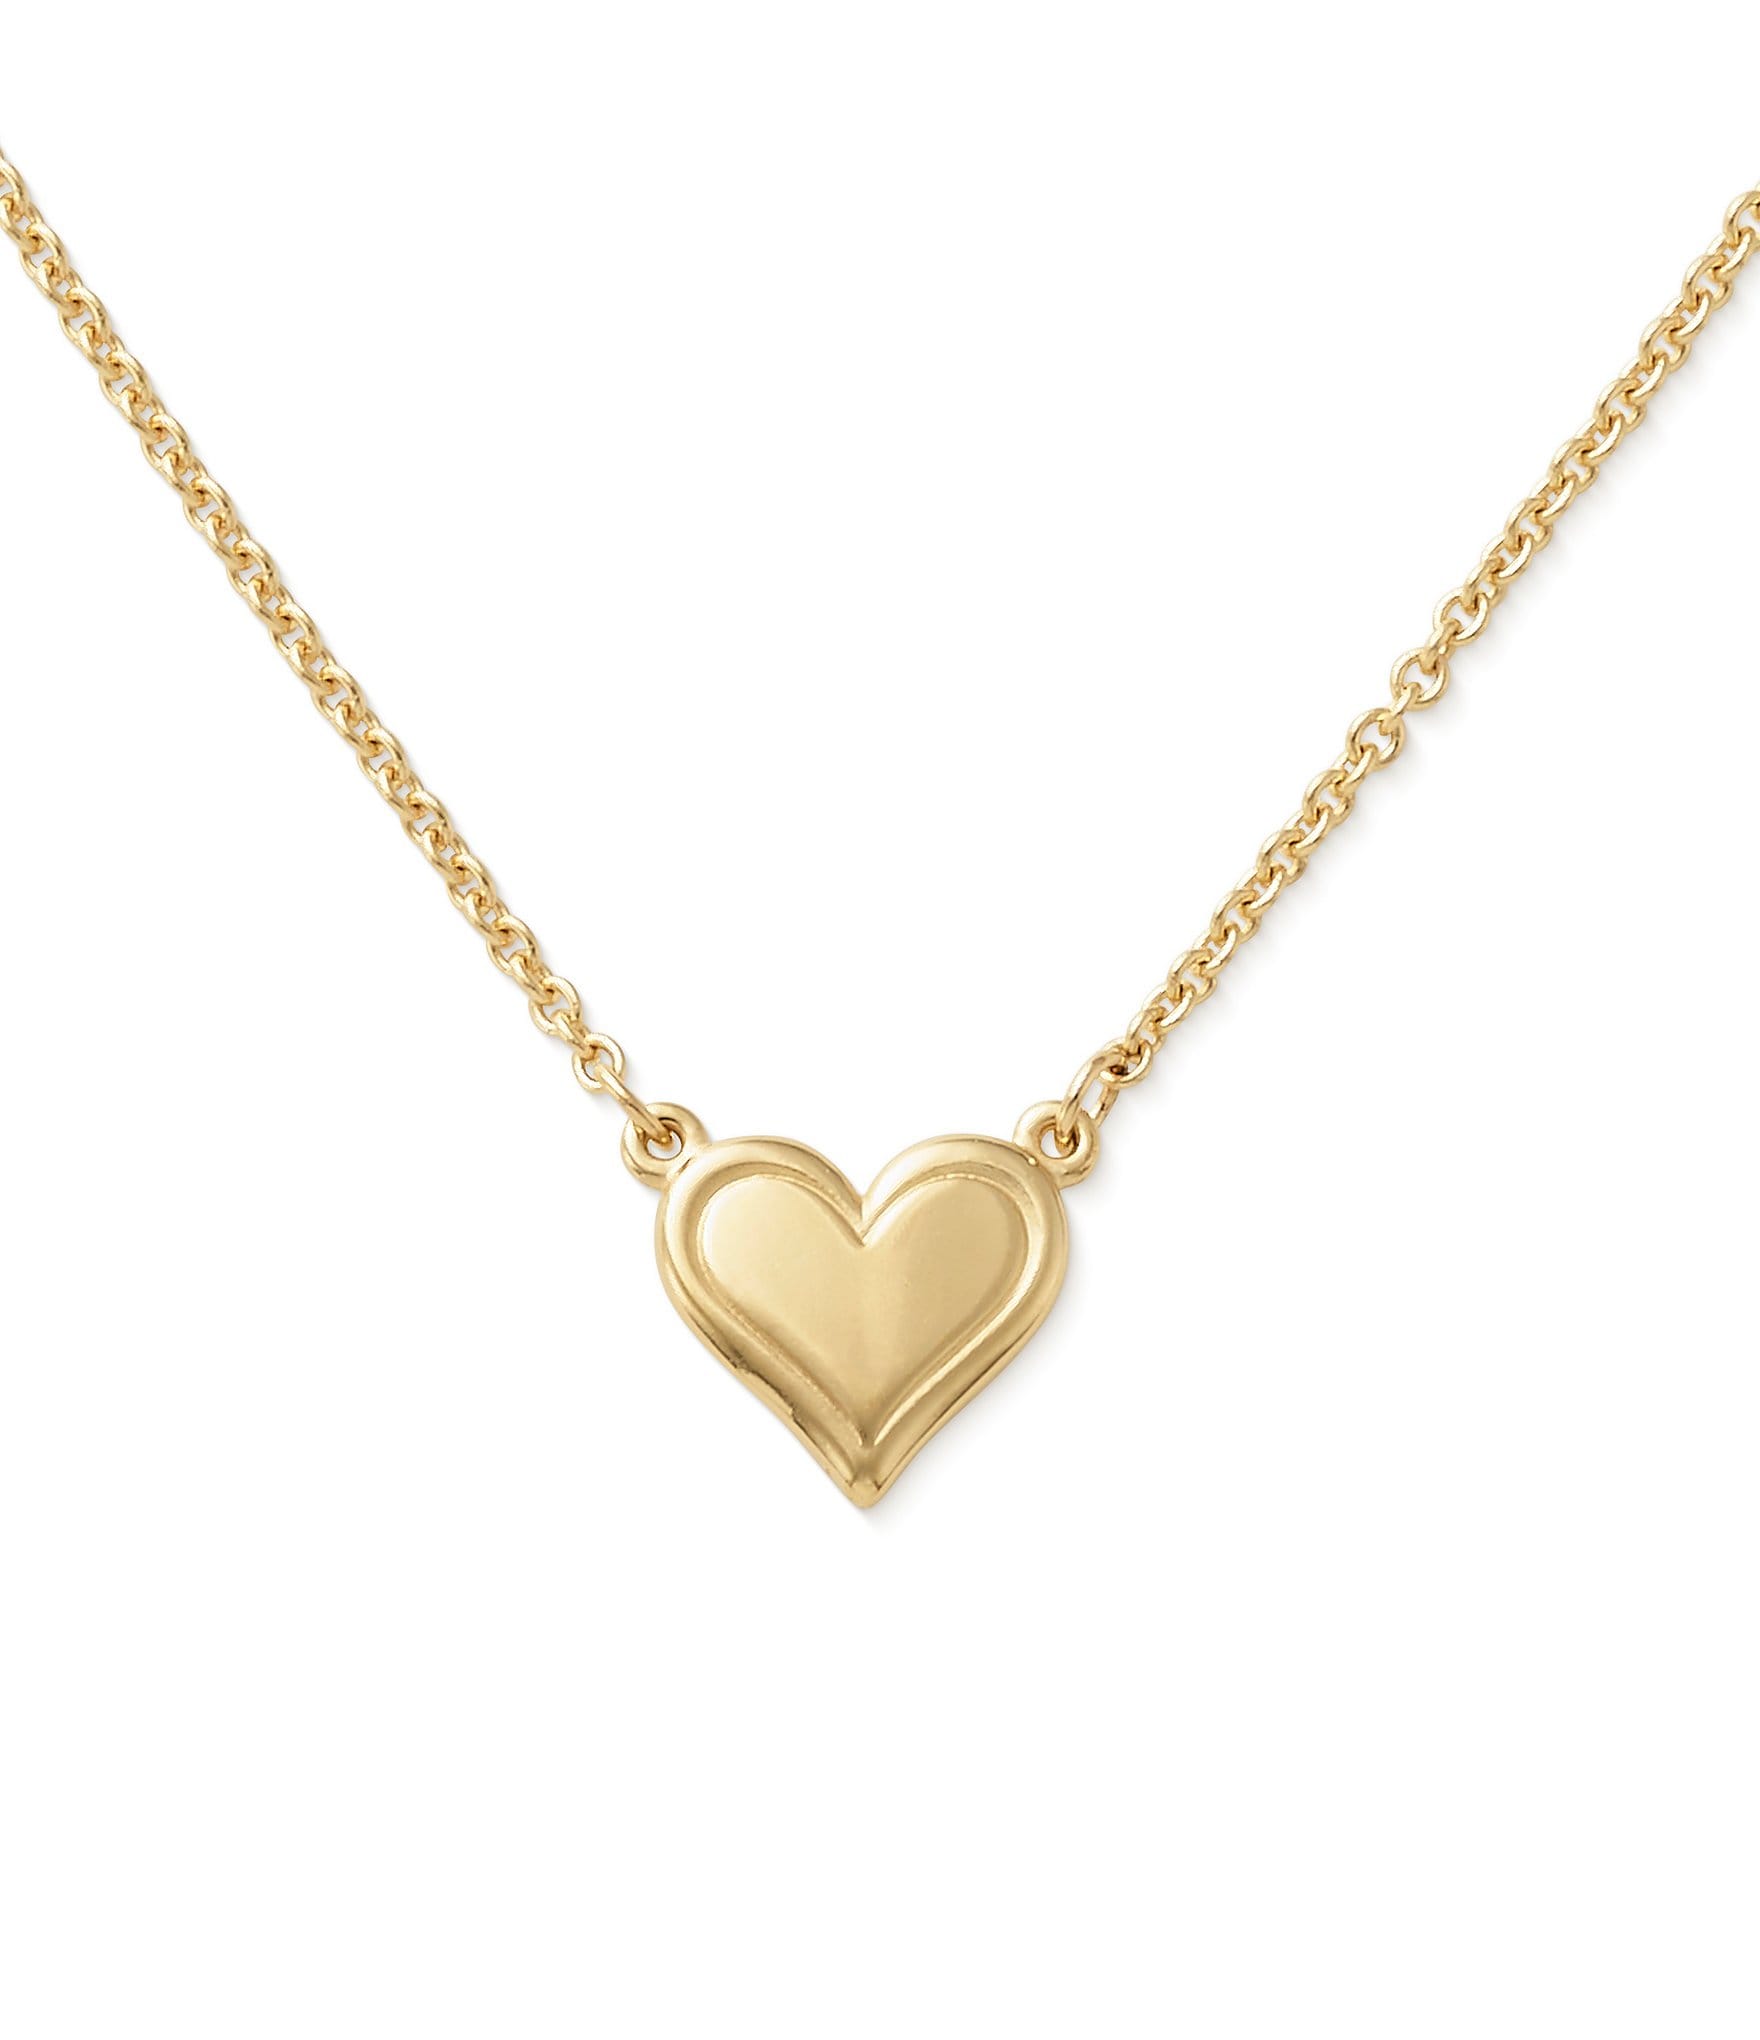 Tiny Heart Necklace, Solid Gold Heart Necklace, Small Gold Heart Necklace,  Dainty Heart Necklace, Pendant Necklaces - Etsy | Tiny heart necklace, Gold  heart necklace, Heart necklace